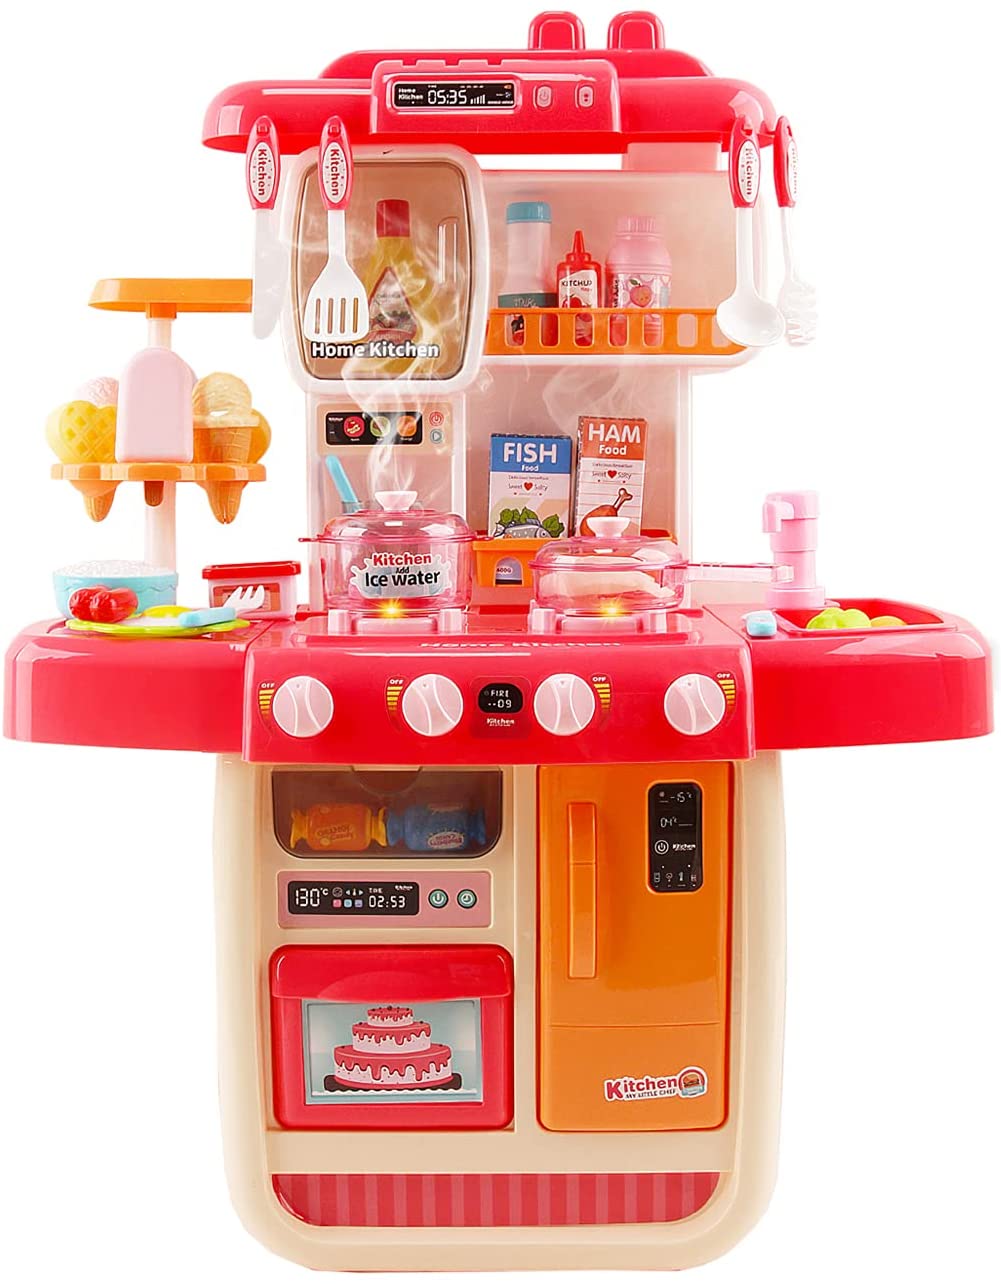 ‘My Little Chef’ Miniature Kitchen Play Set with 34 Accessories Induction Hob Colour Changing Toy Food Water Light Sound Features (PINK)-K3P